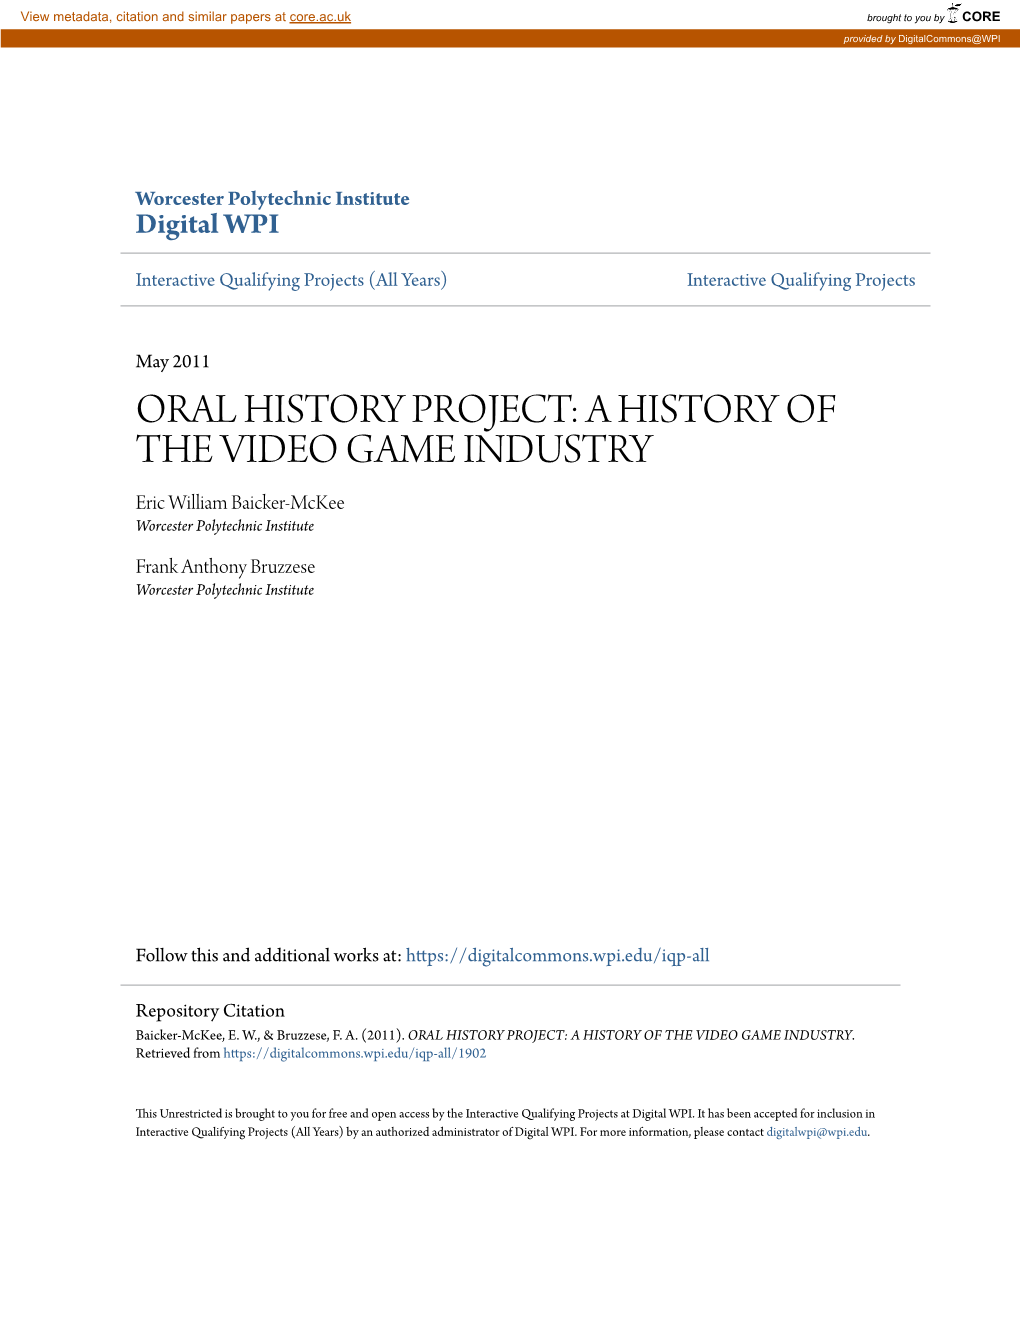 A HISTORY of the VIDEO GAME INDUSTRY Eric William Baicker-Mckee Worcester Polytechnic Institute